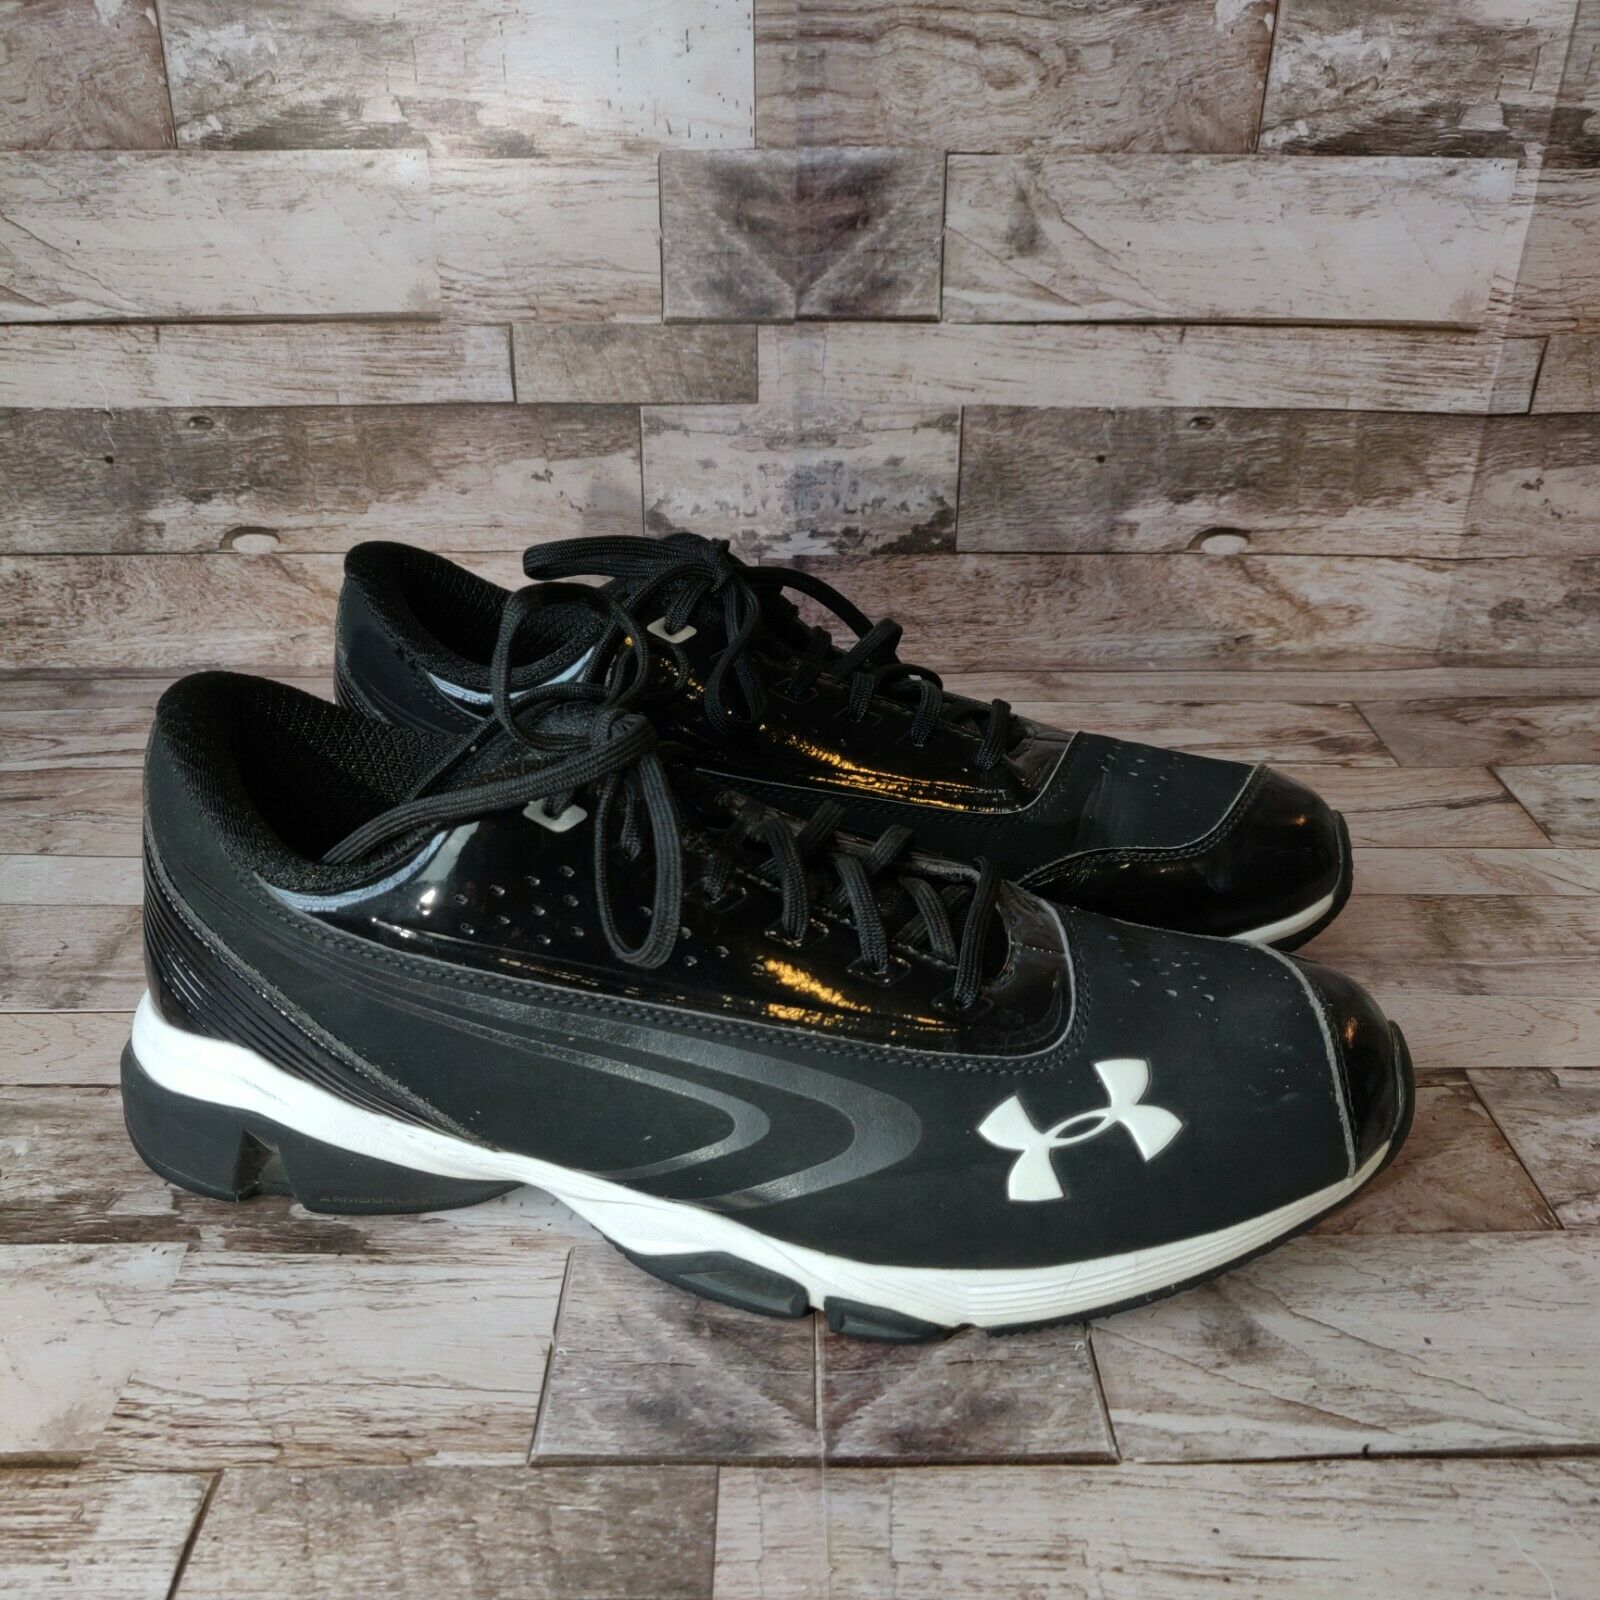 UNDER ARMOUR DCE Size 12.5 4D Foam Black Running Walking Shoes Sneakers 1235209